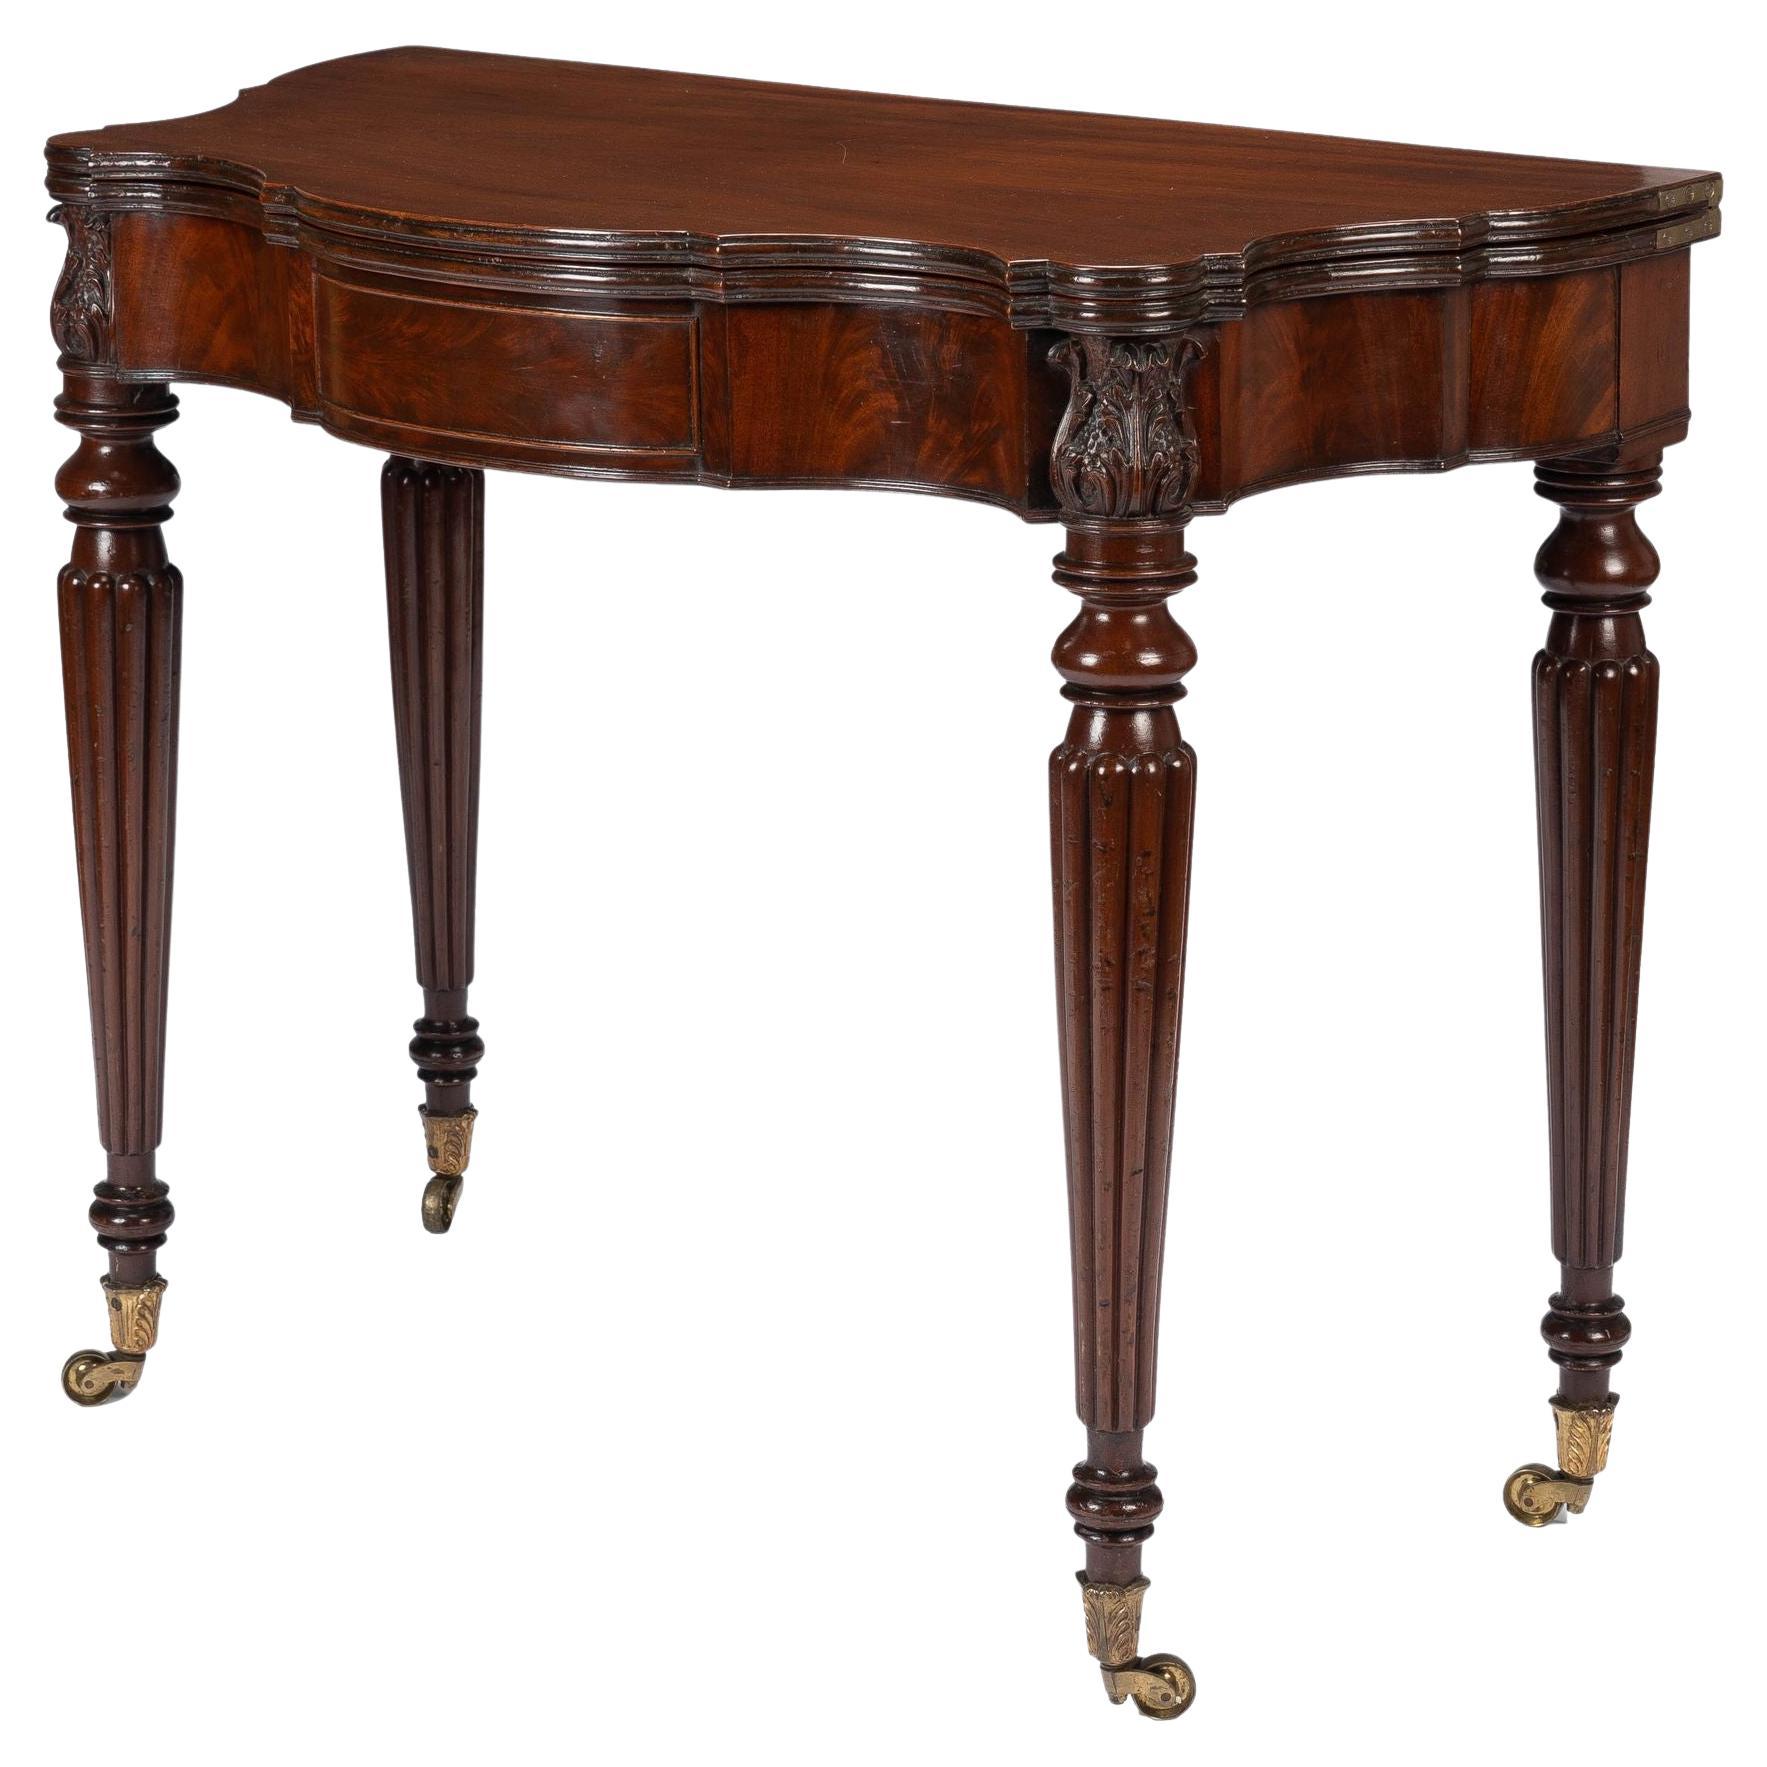 Samuel Field Macintire Attributed Mahogany Flip Top Game Table, c. 1810-15 For Sale